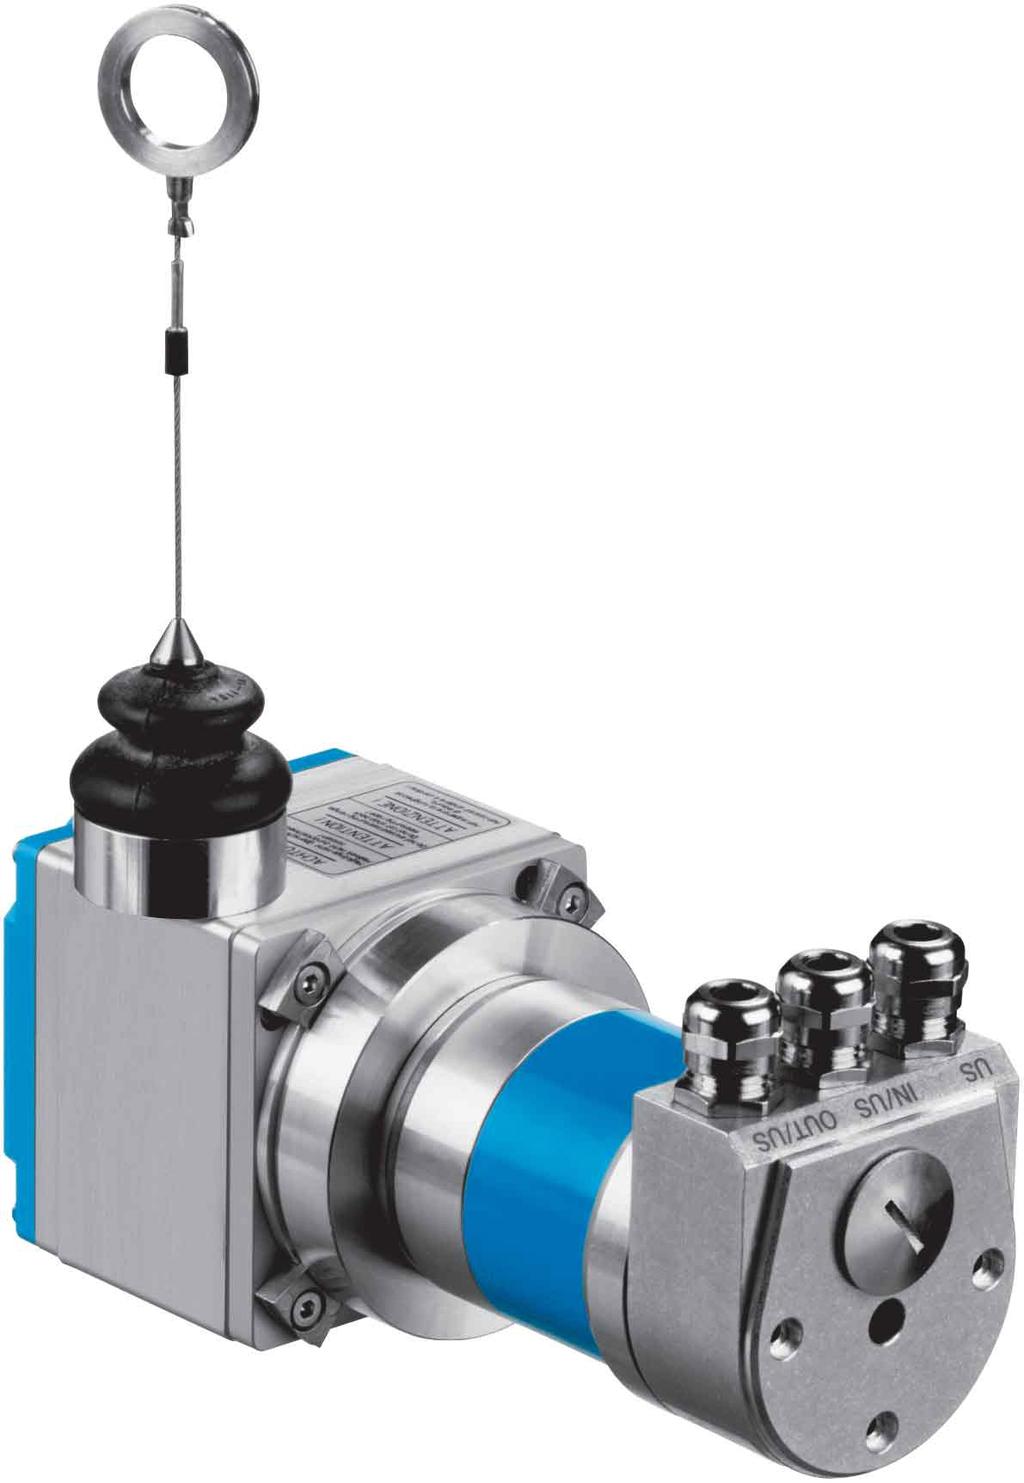 Absolute wire draw encoder BTF08 field buses, measuring lengths up to 3 m Resolution up to 0.